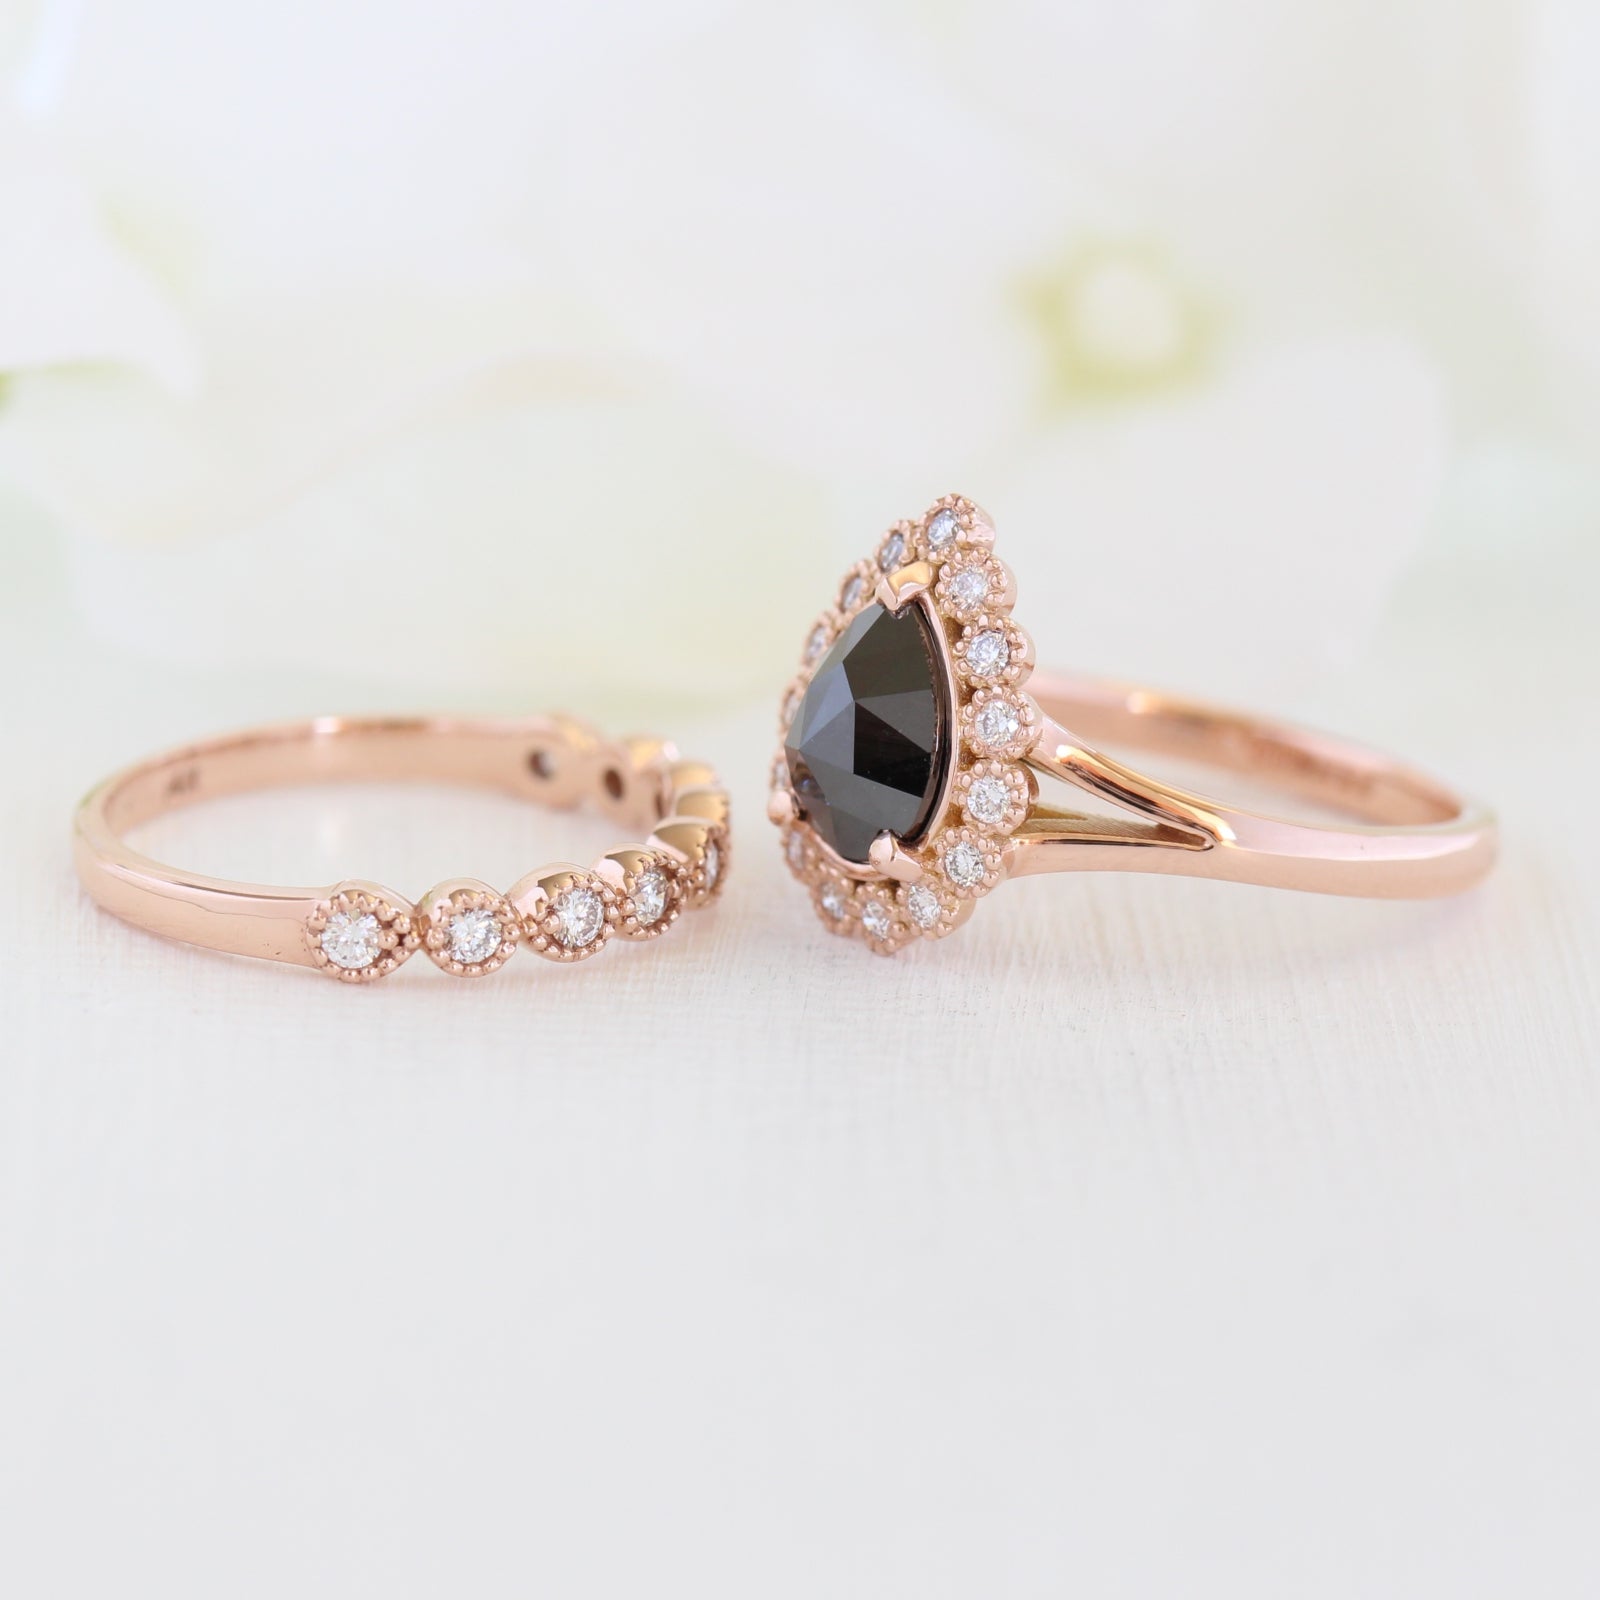 pear rose cut black diamond ring rose gold and vintage style diamond wedding ring set by la more design